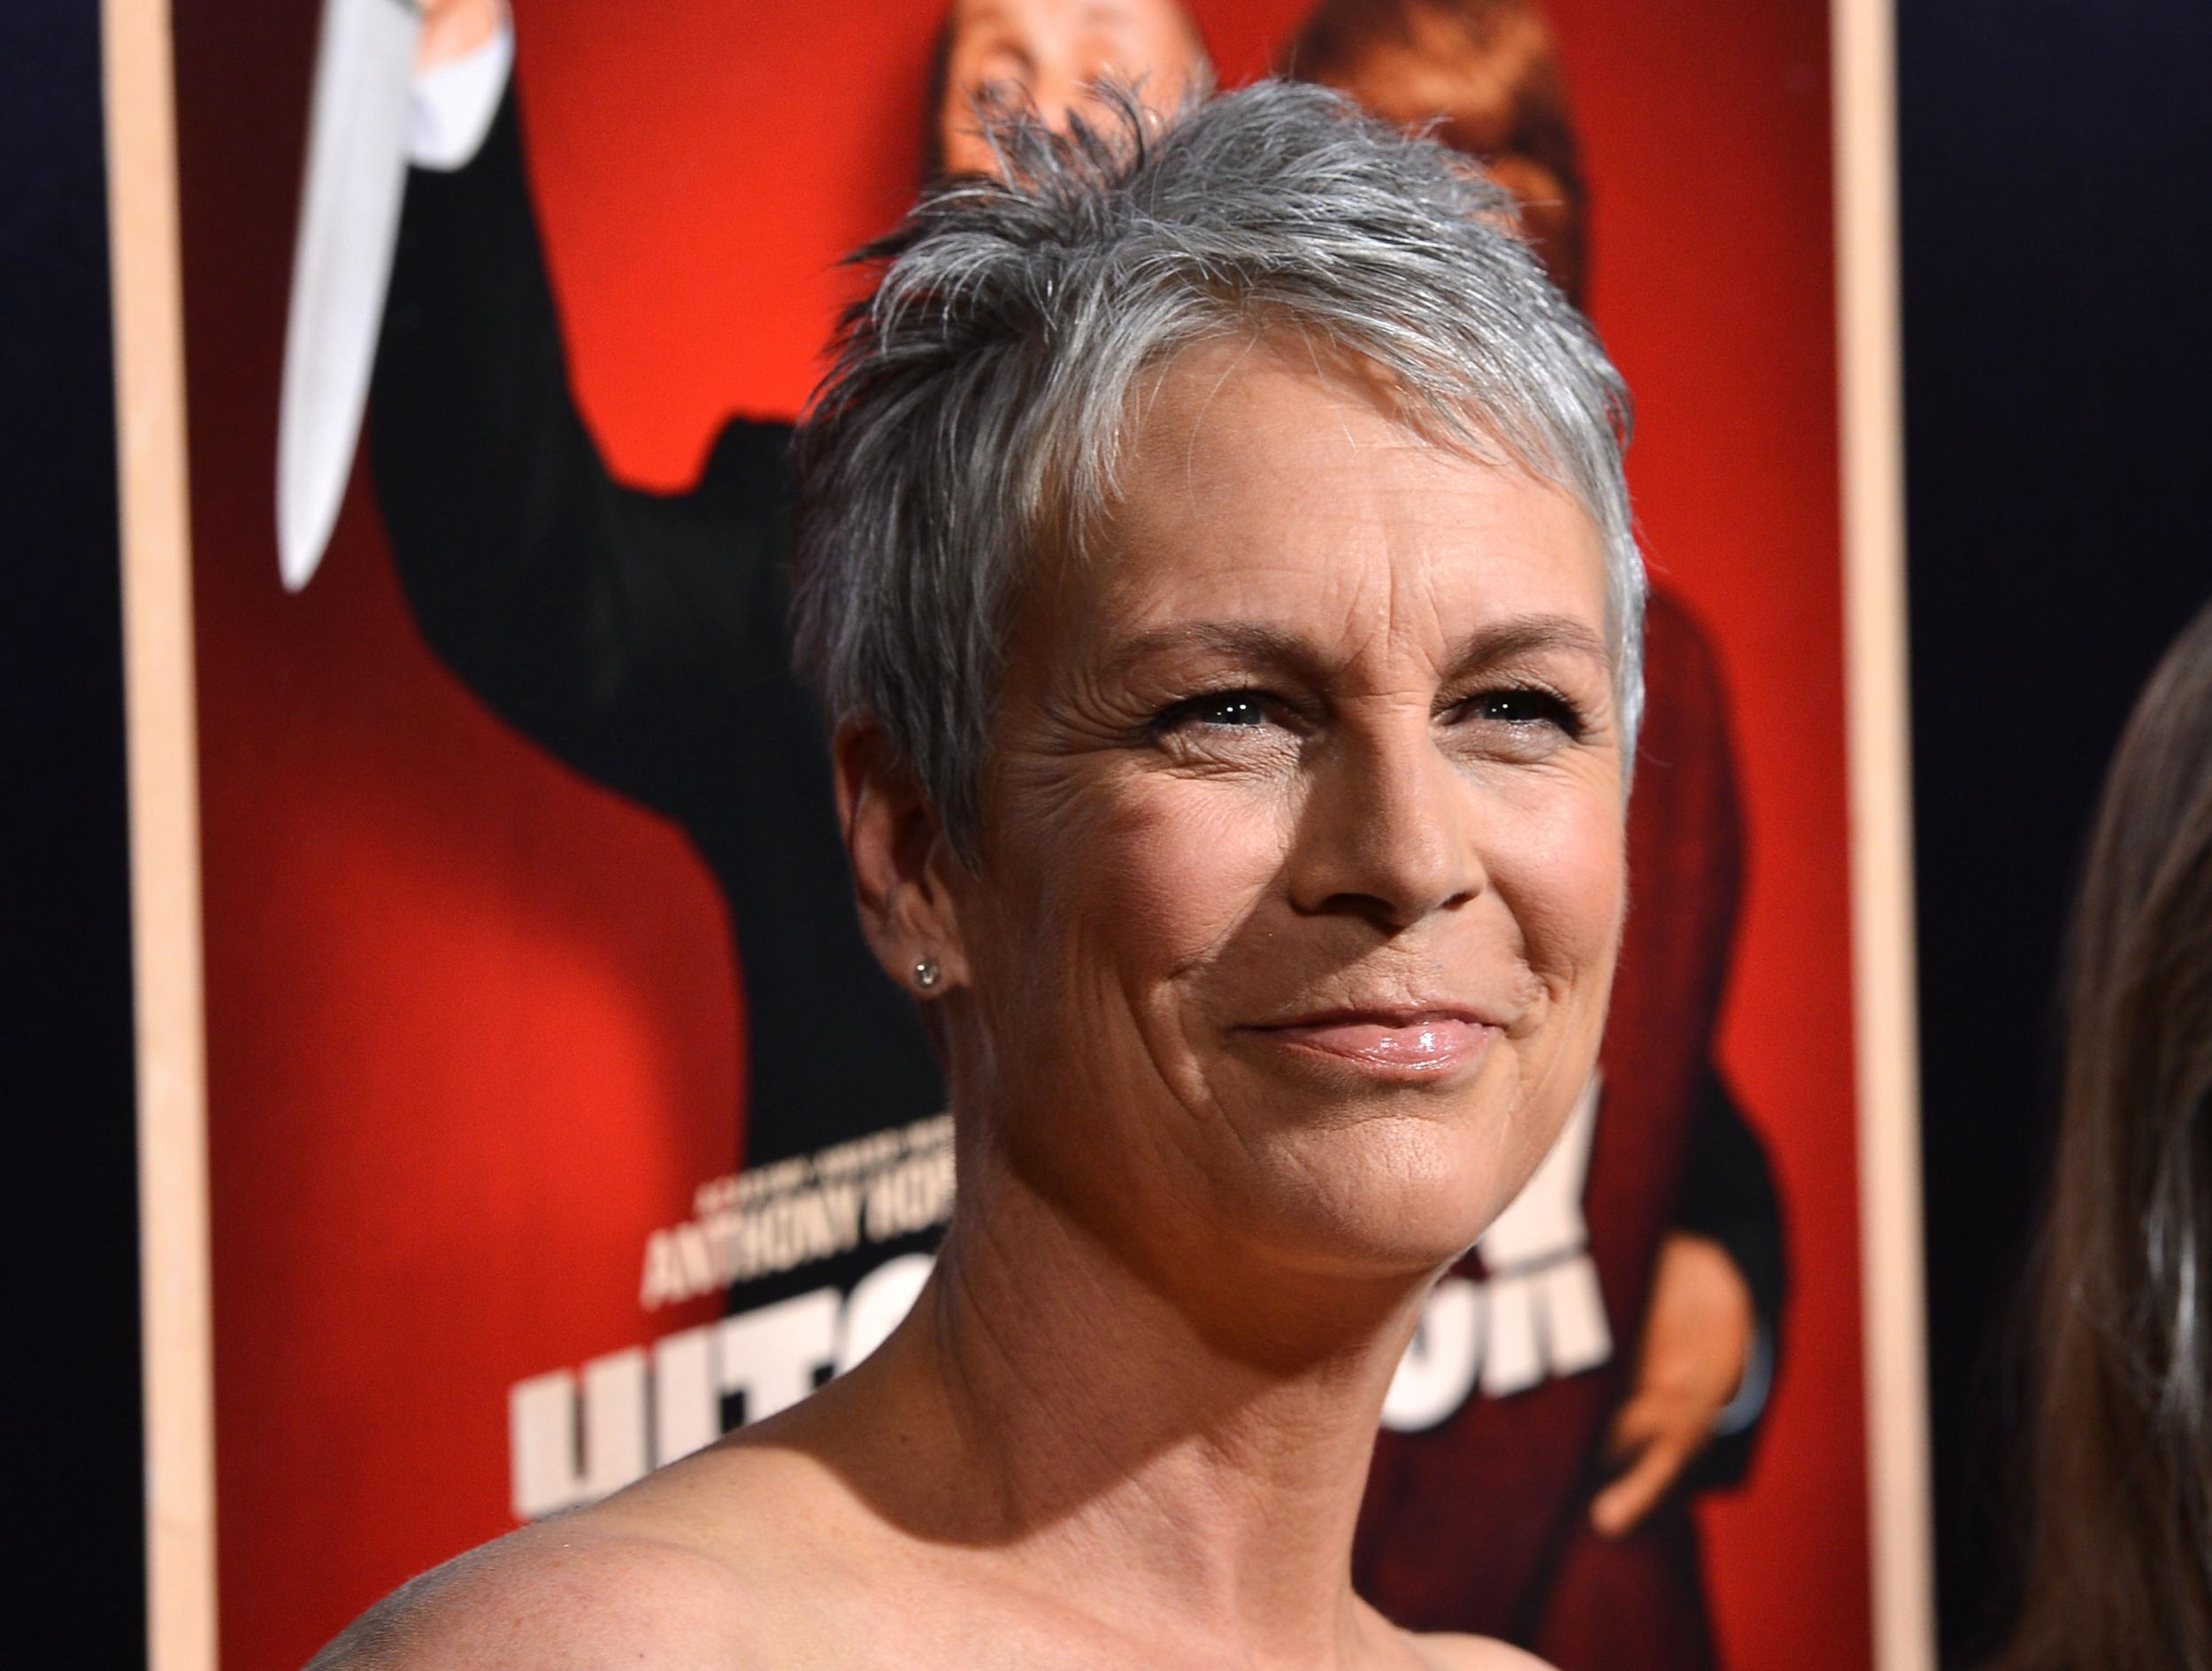 Jamie Lee Curtis stopped taking prescription drugs 17 years ago